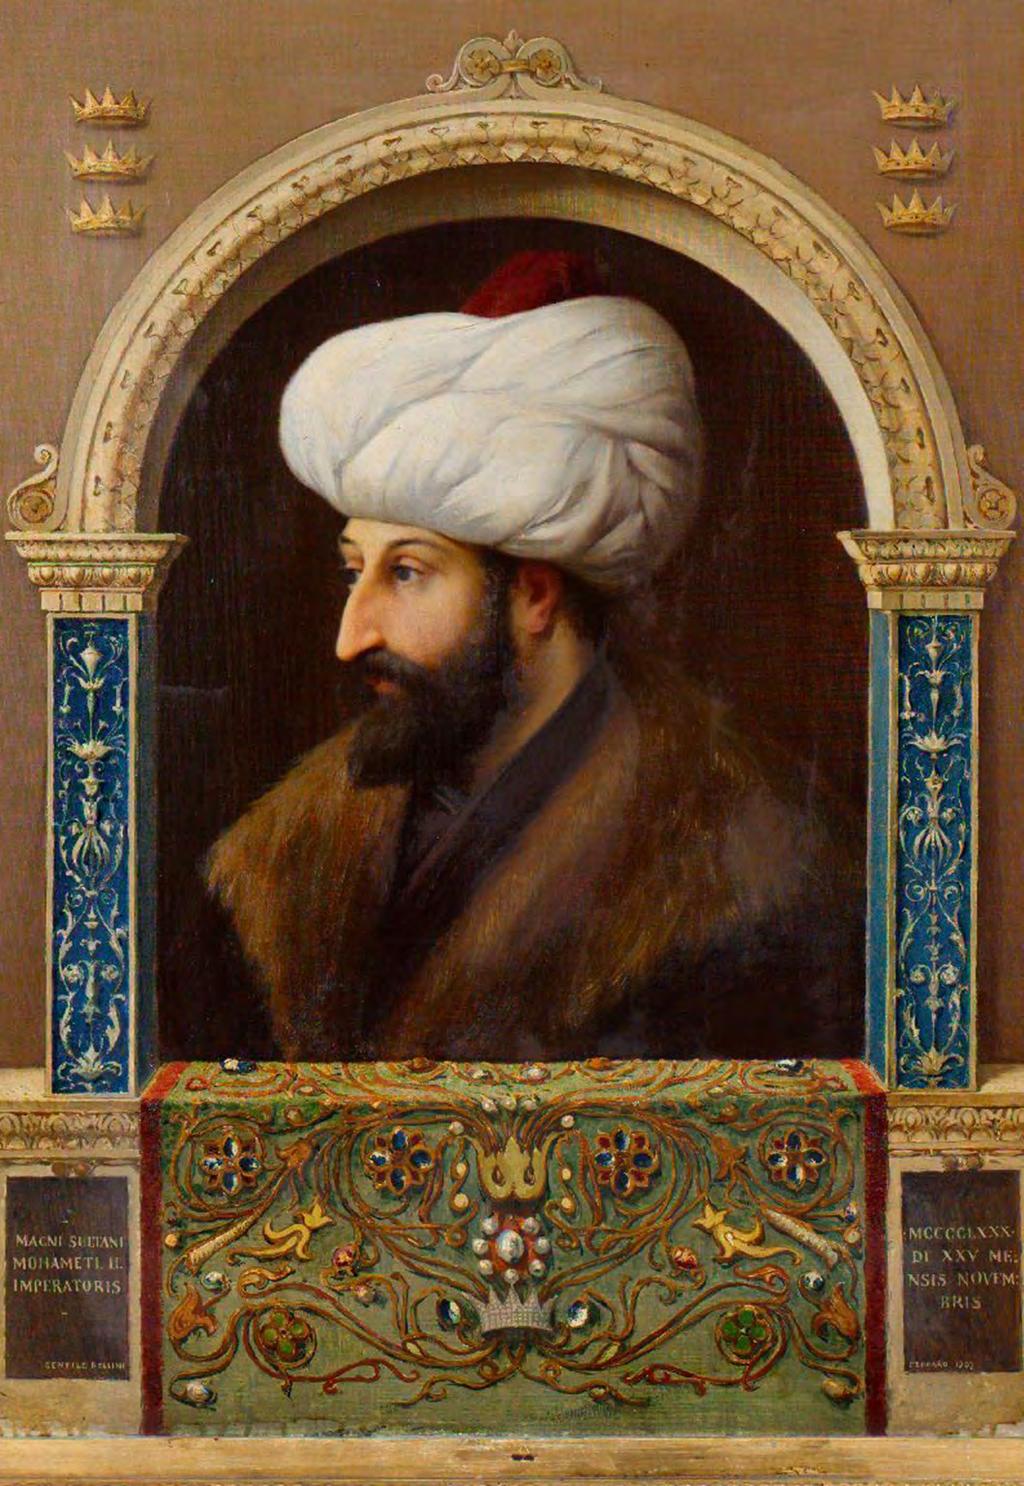 Above: Potrait of Mehmed the